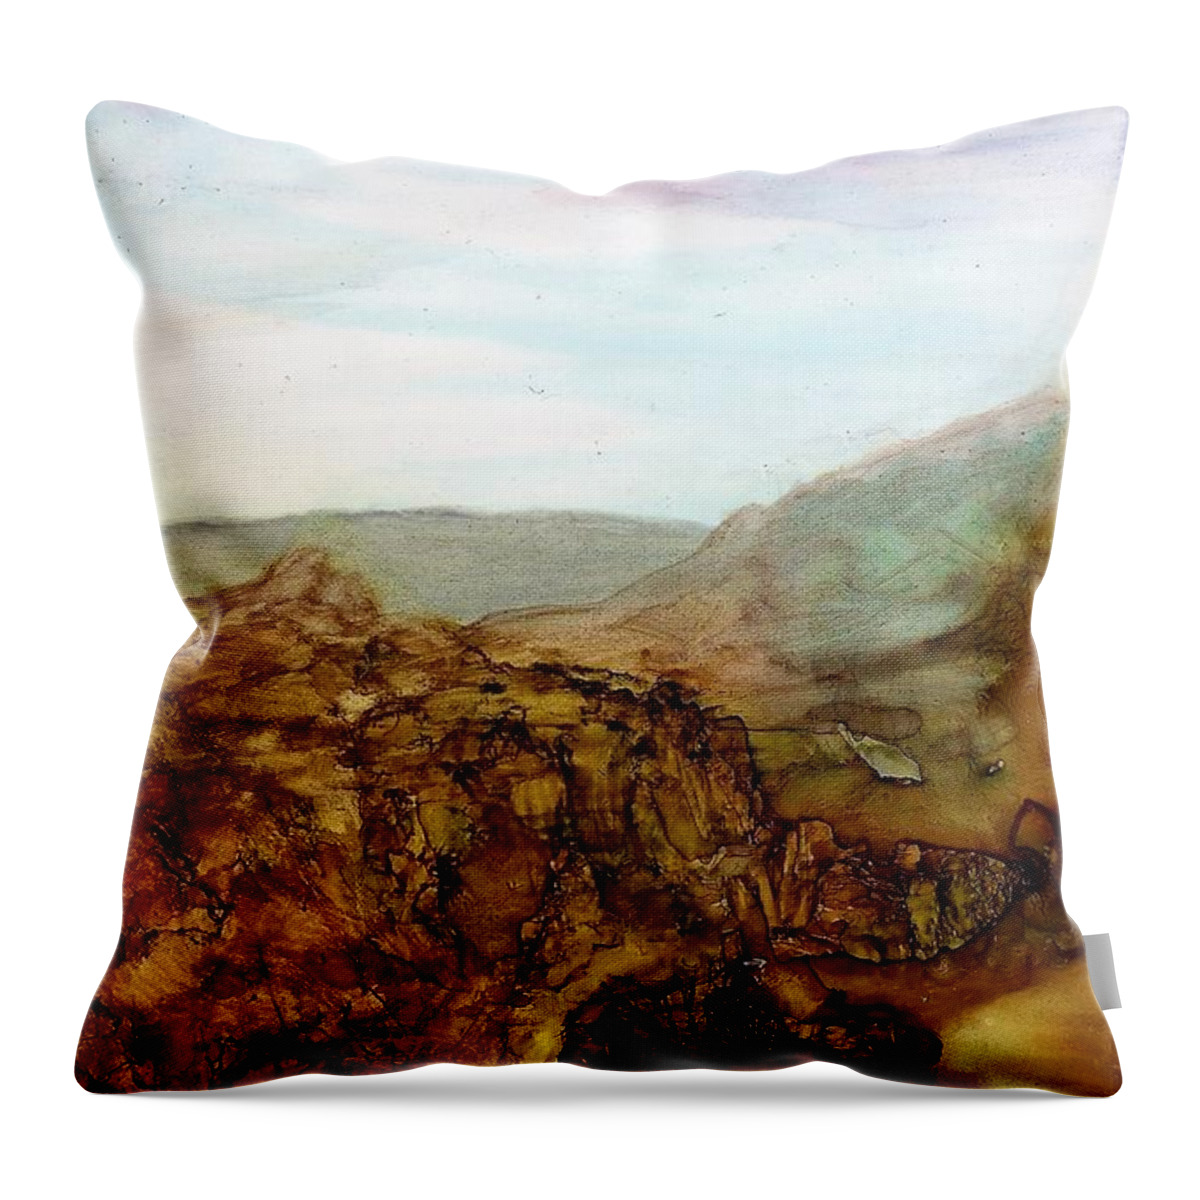 Alcohol Ink Throw Pillow featuring the painting North through the canyon by Angela Marinari